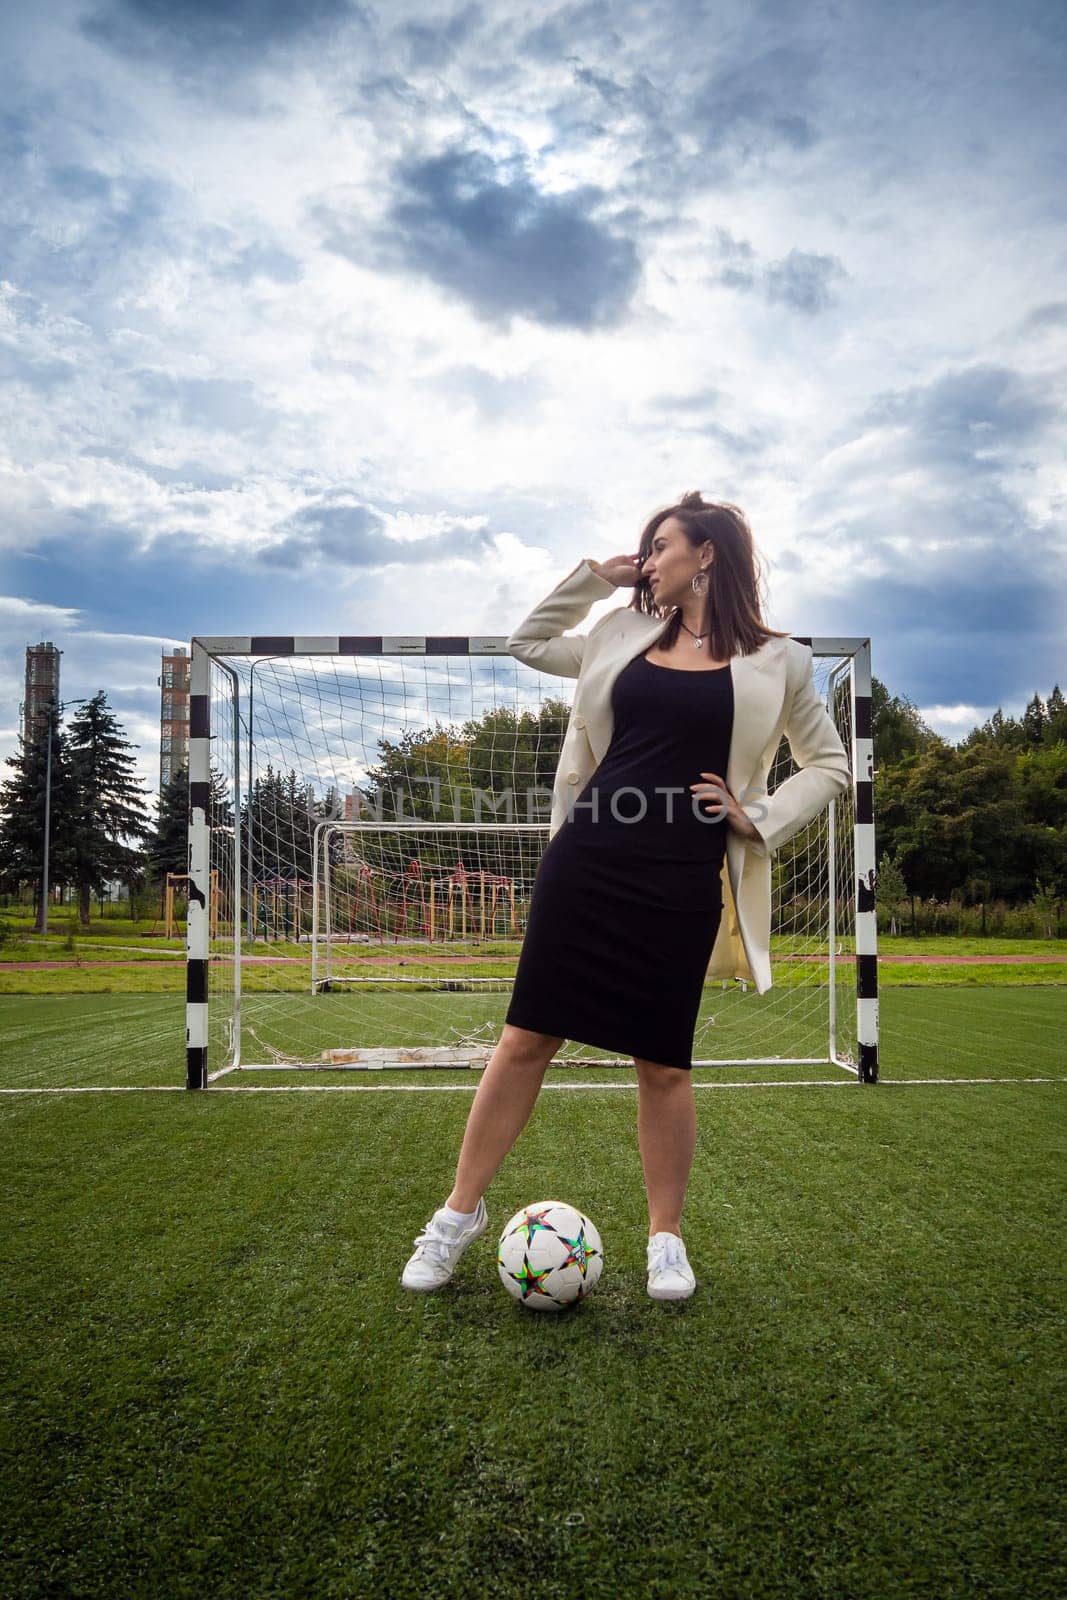 portrait of a beautiful woman football player in a strict office suit. concept sports office manager leisure